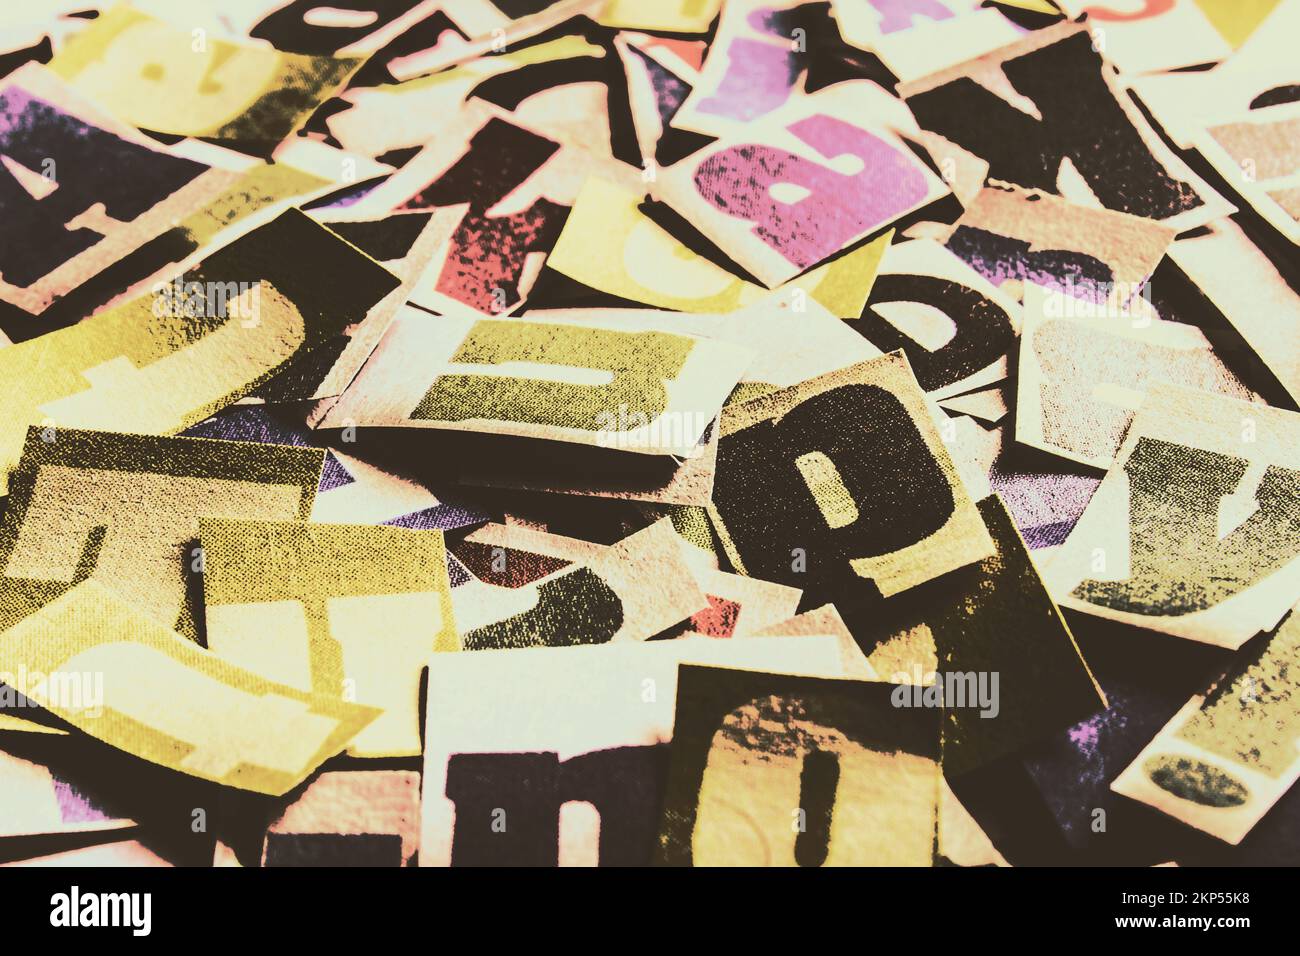 Retro still-life photo on a scattered crossword of chopped newspaper print. Abstract typescript Stock Photo